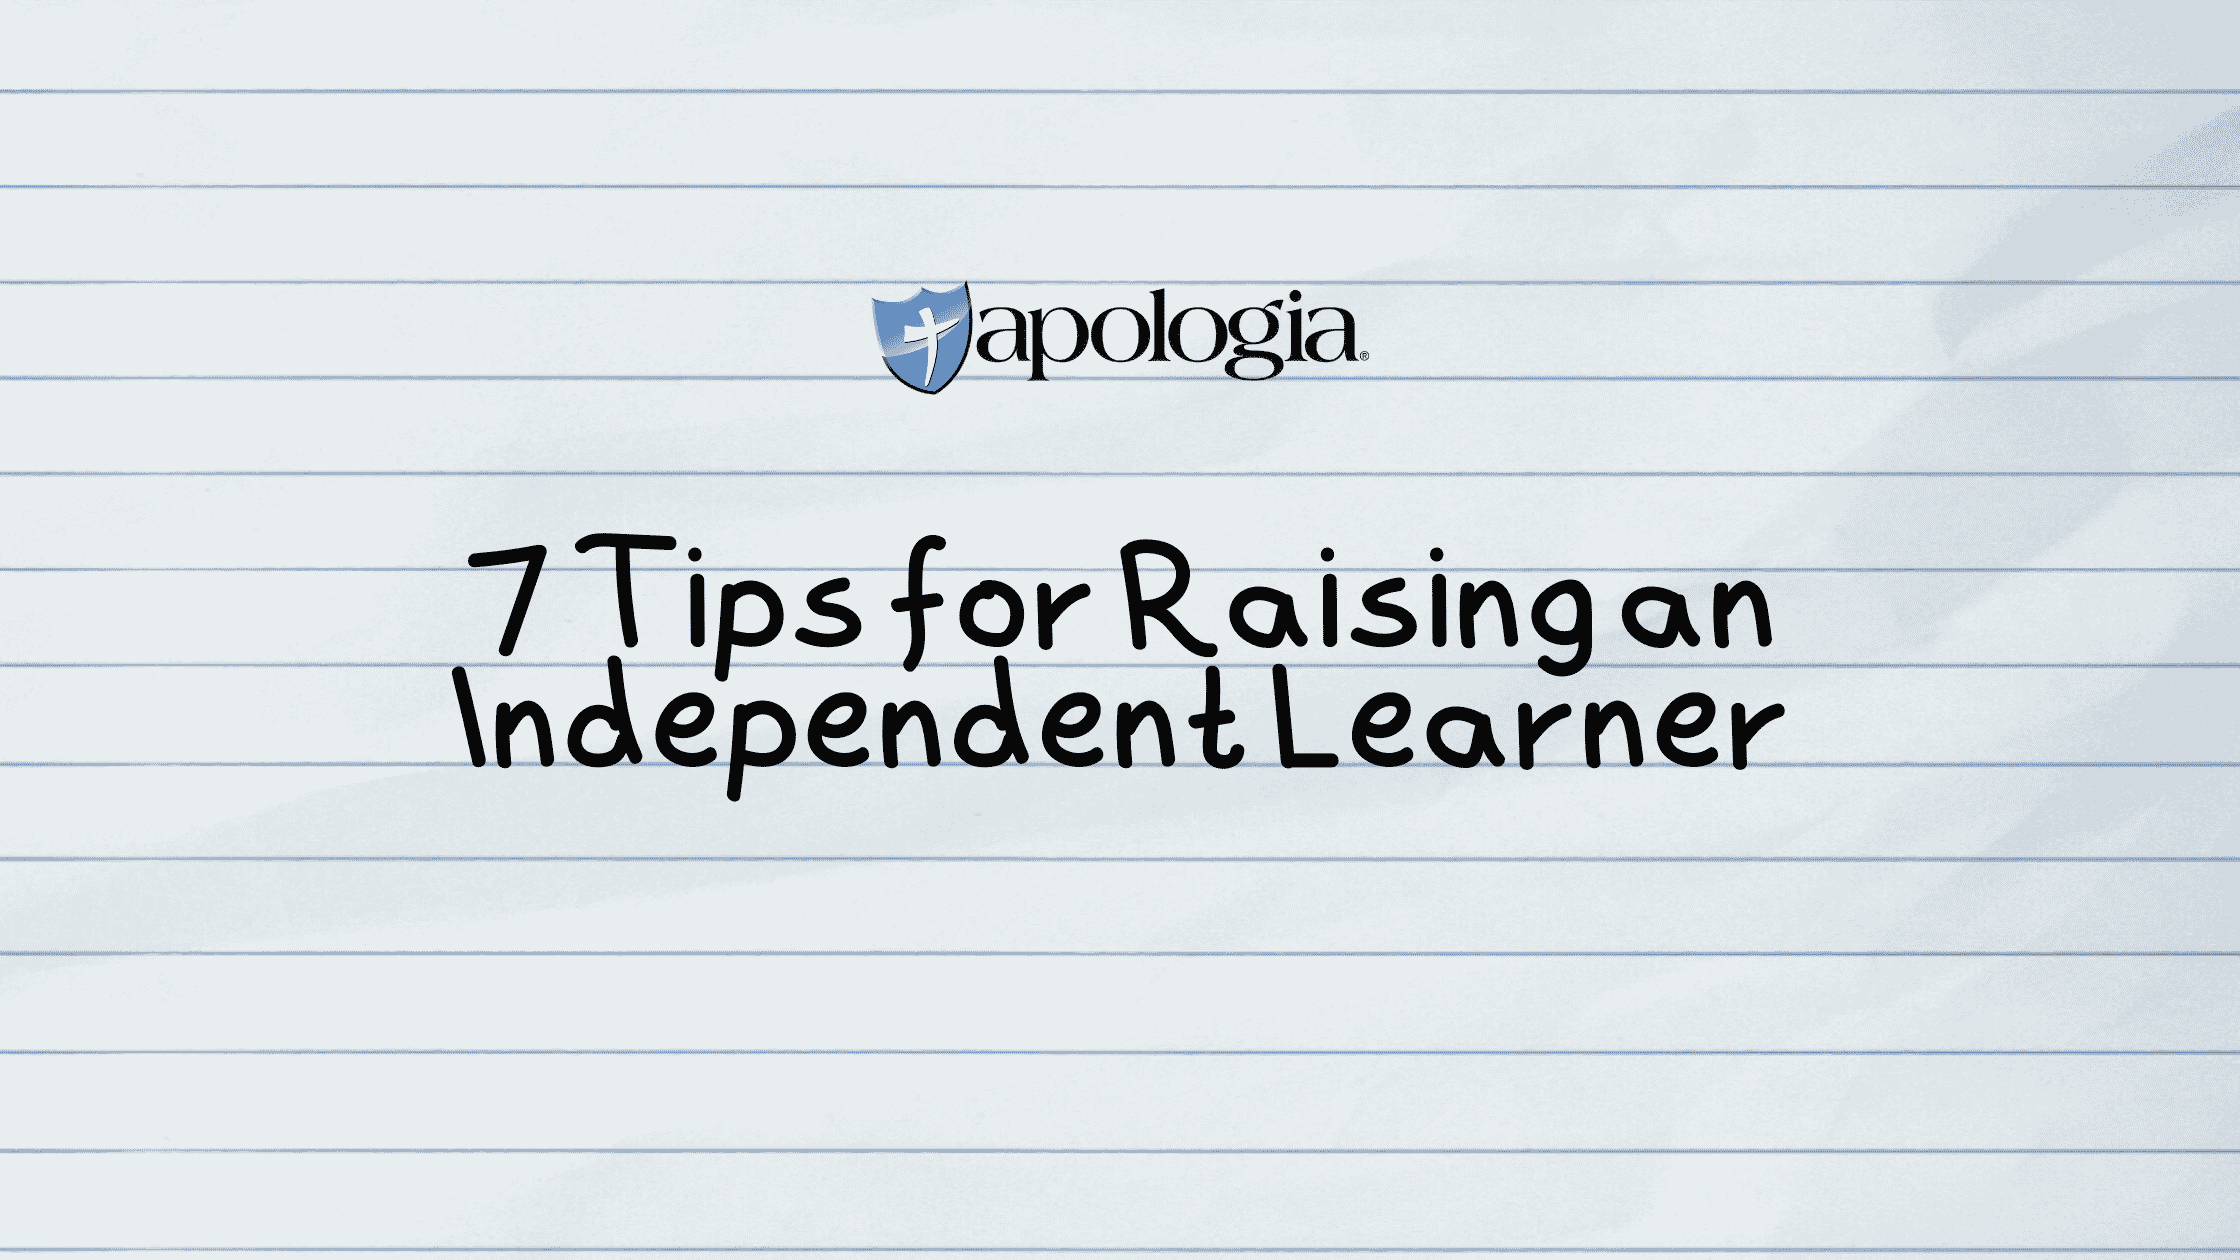 7 Tips for Raising an Independent Learner